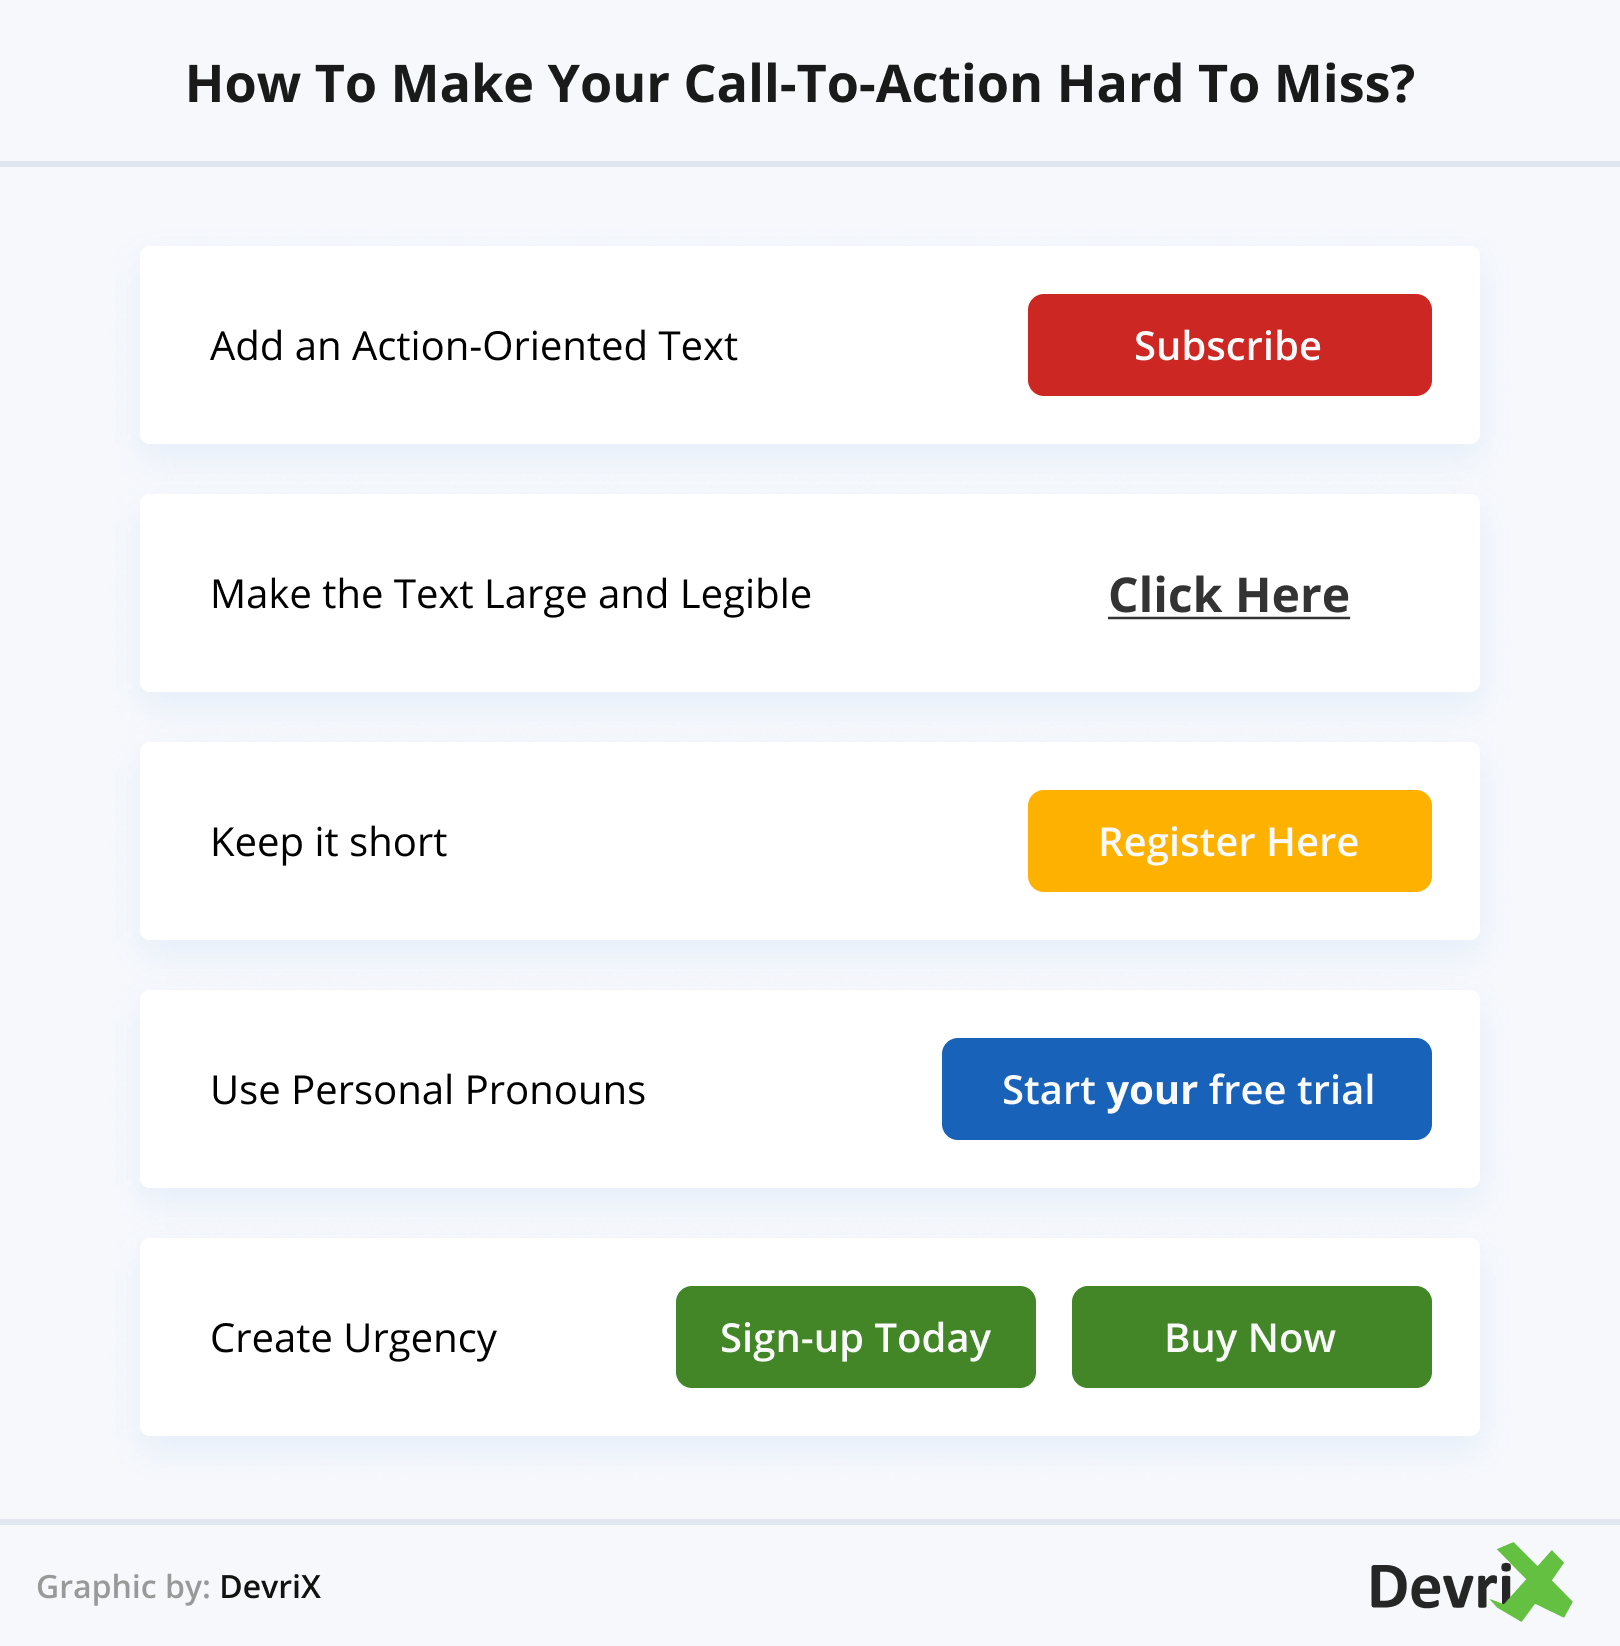 How to Make Your Call-to-Action Hard to Miss